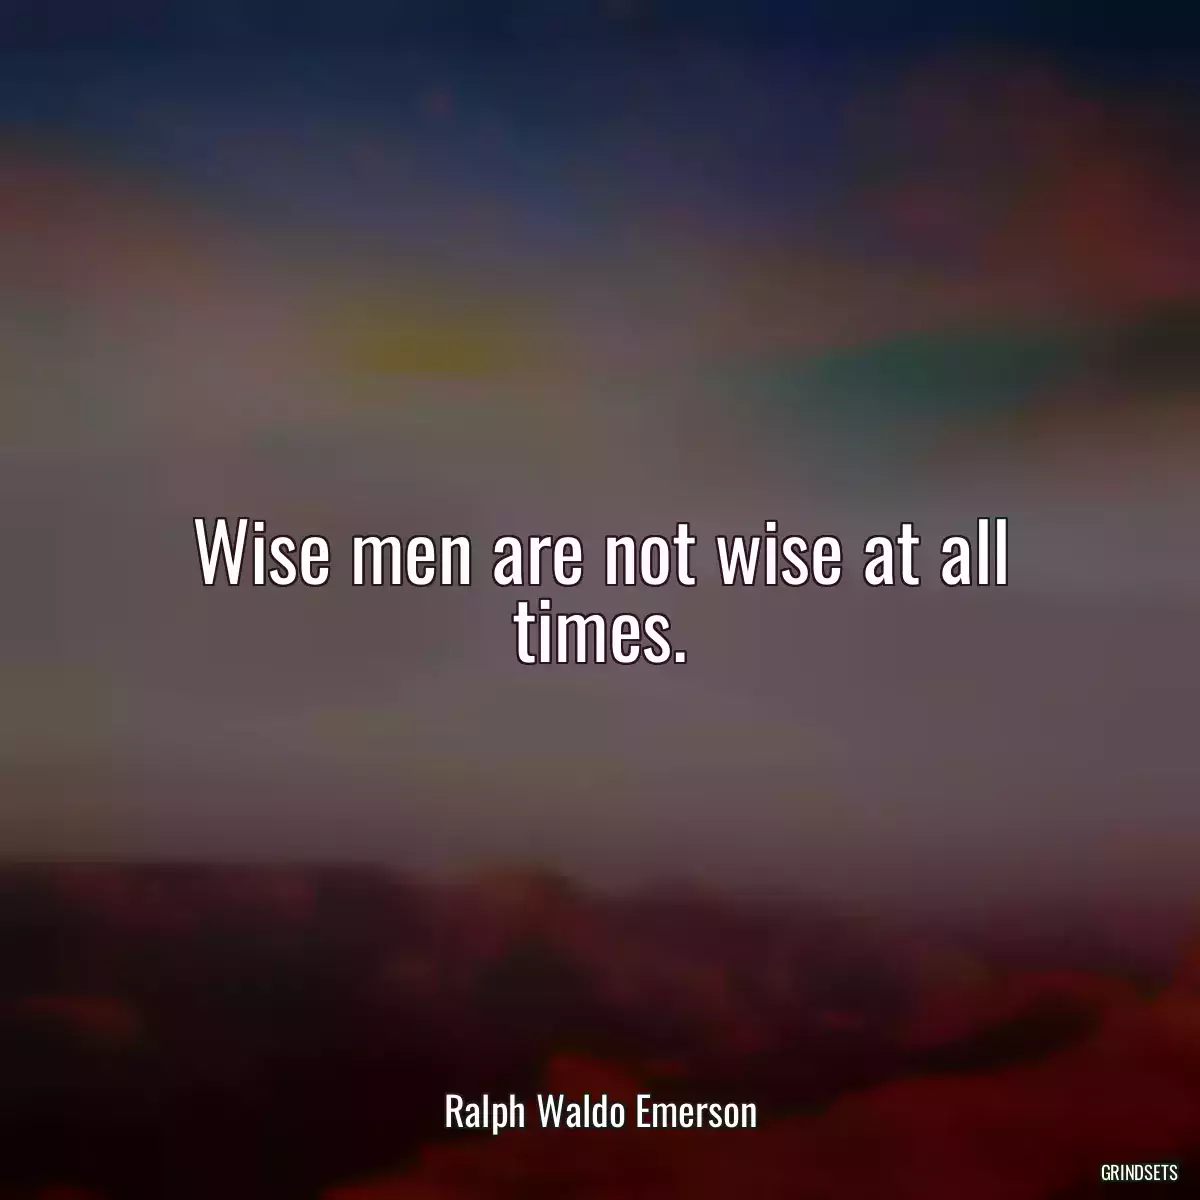 Wise men are not wise at all times.